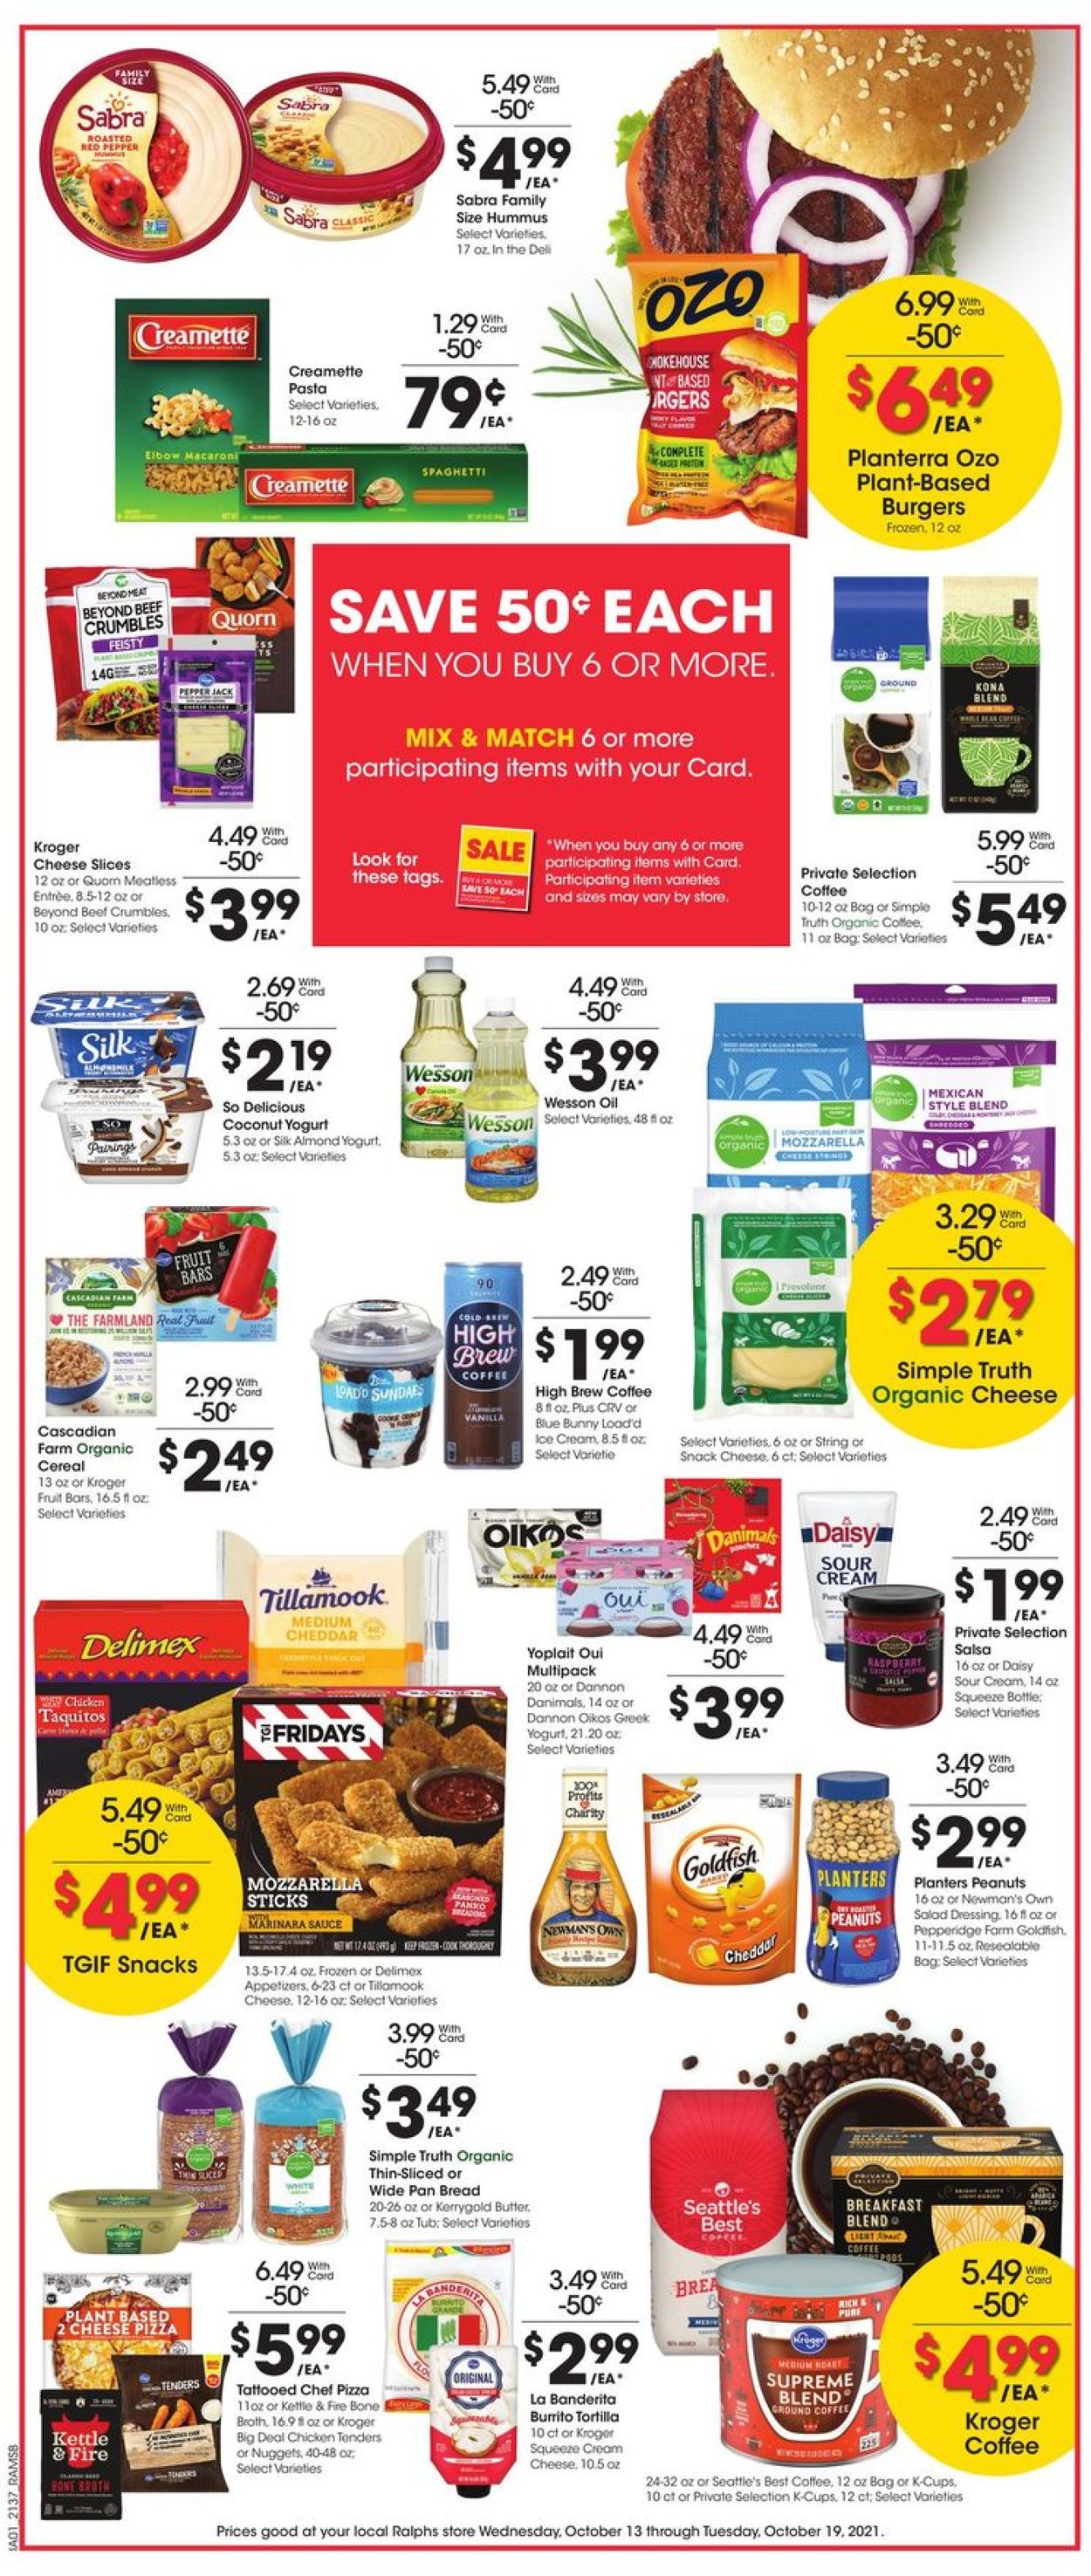 Catalogue Ralphs from 10/13/2021